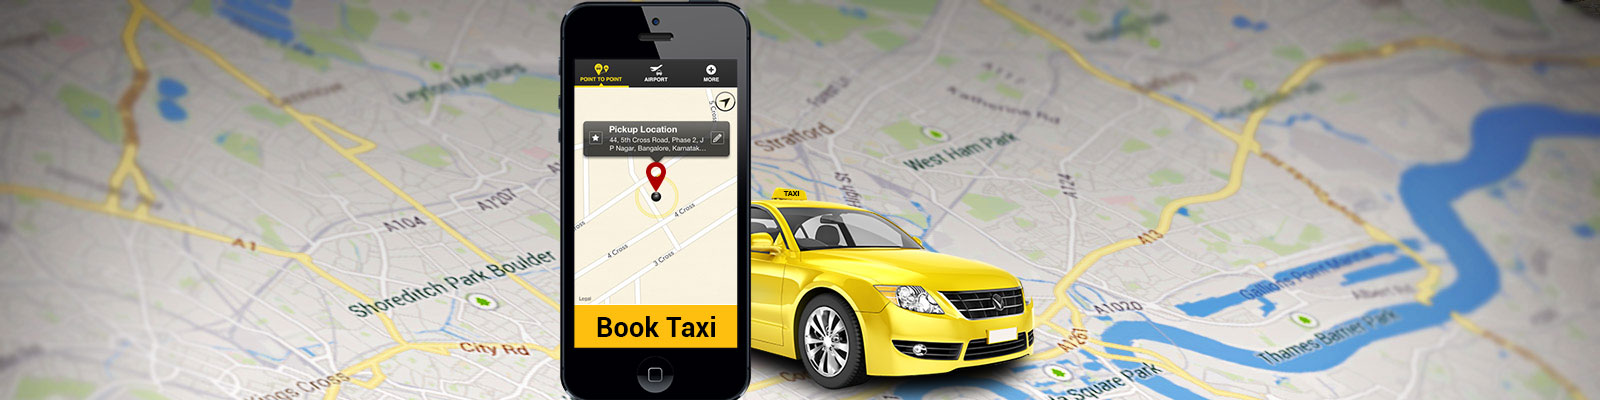 taxi booking mobile app